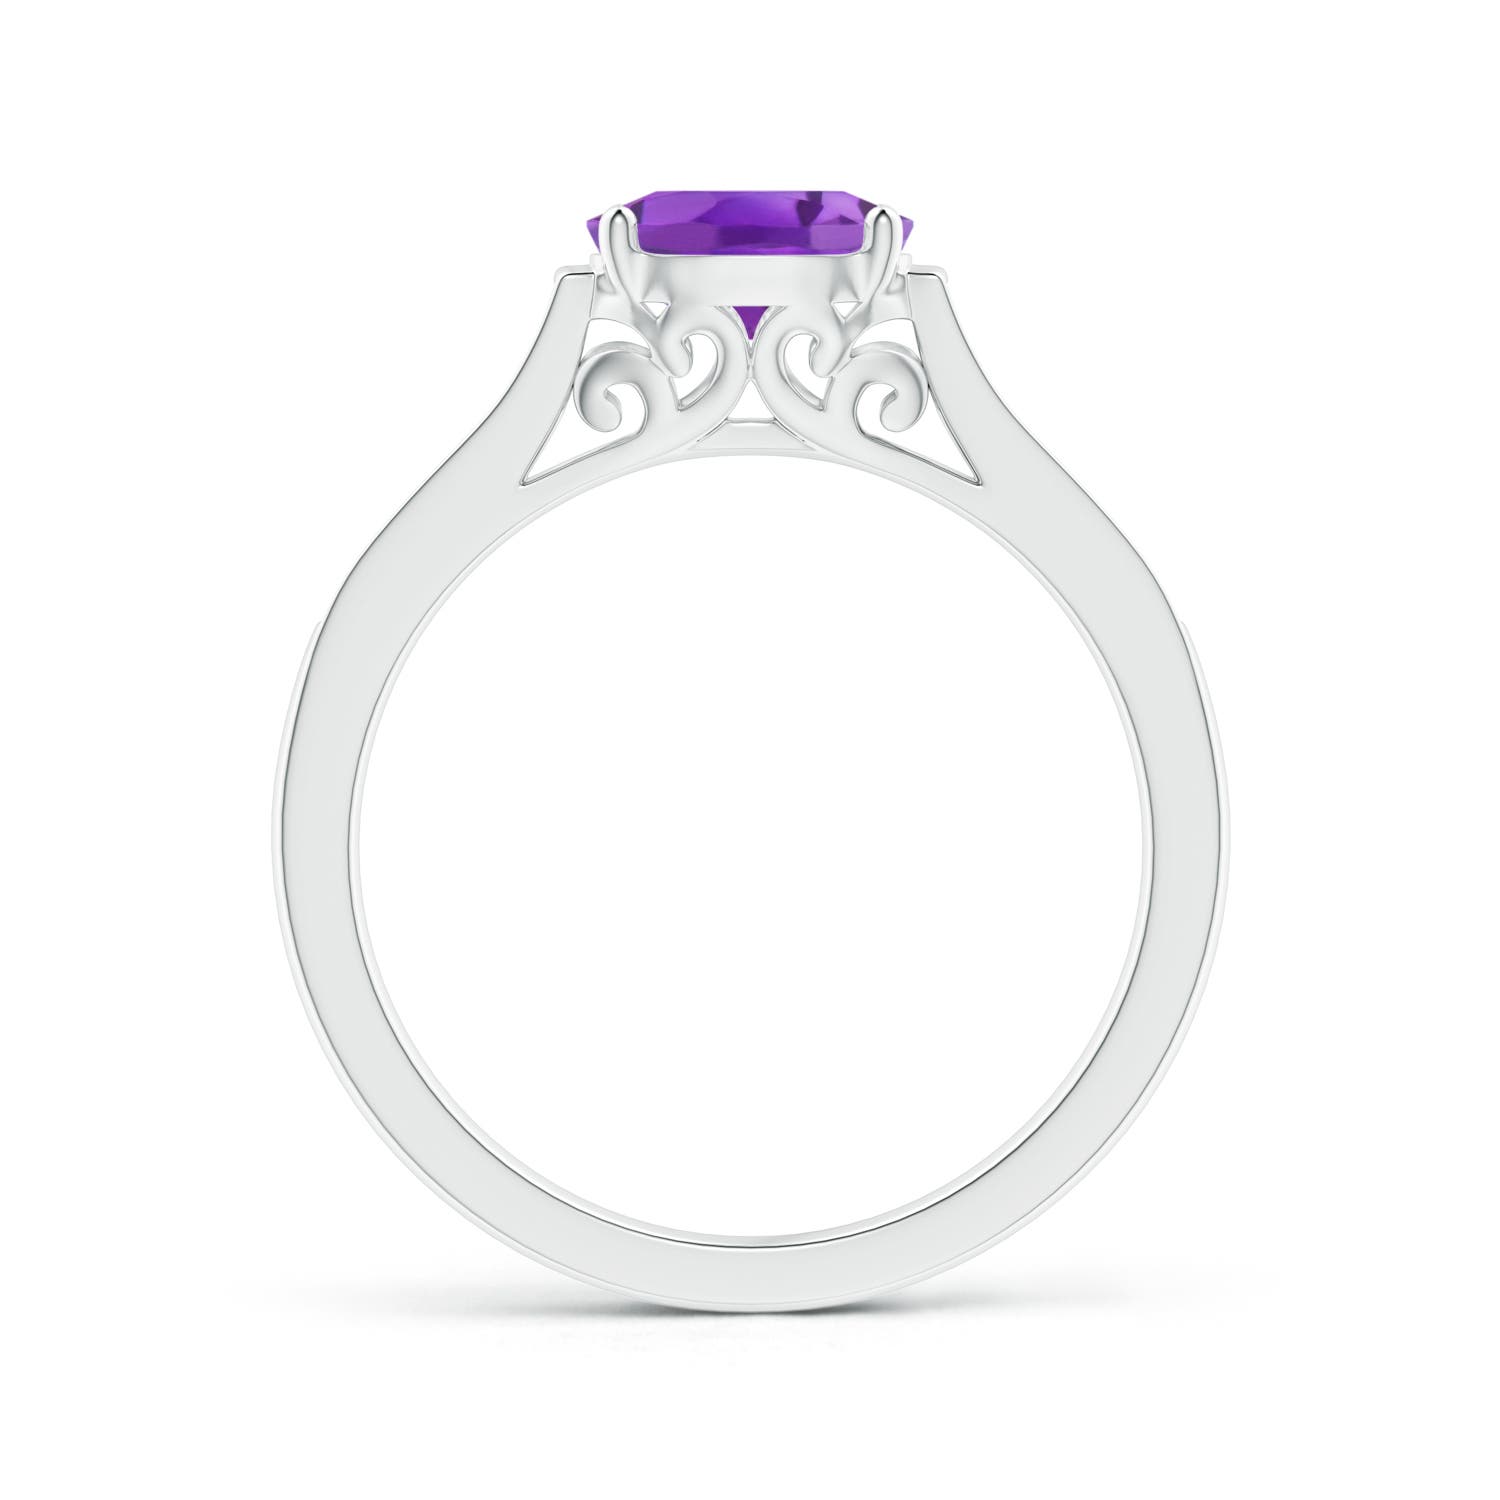 AA - Amethyst / 0.82 CT / 14 KT White Gold